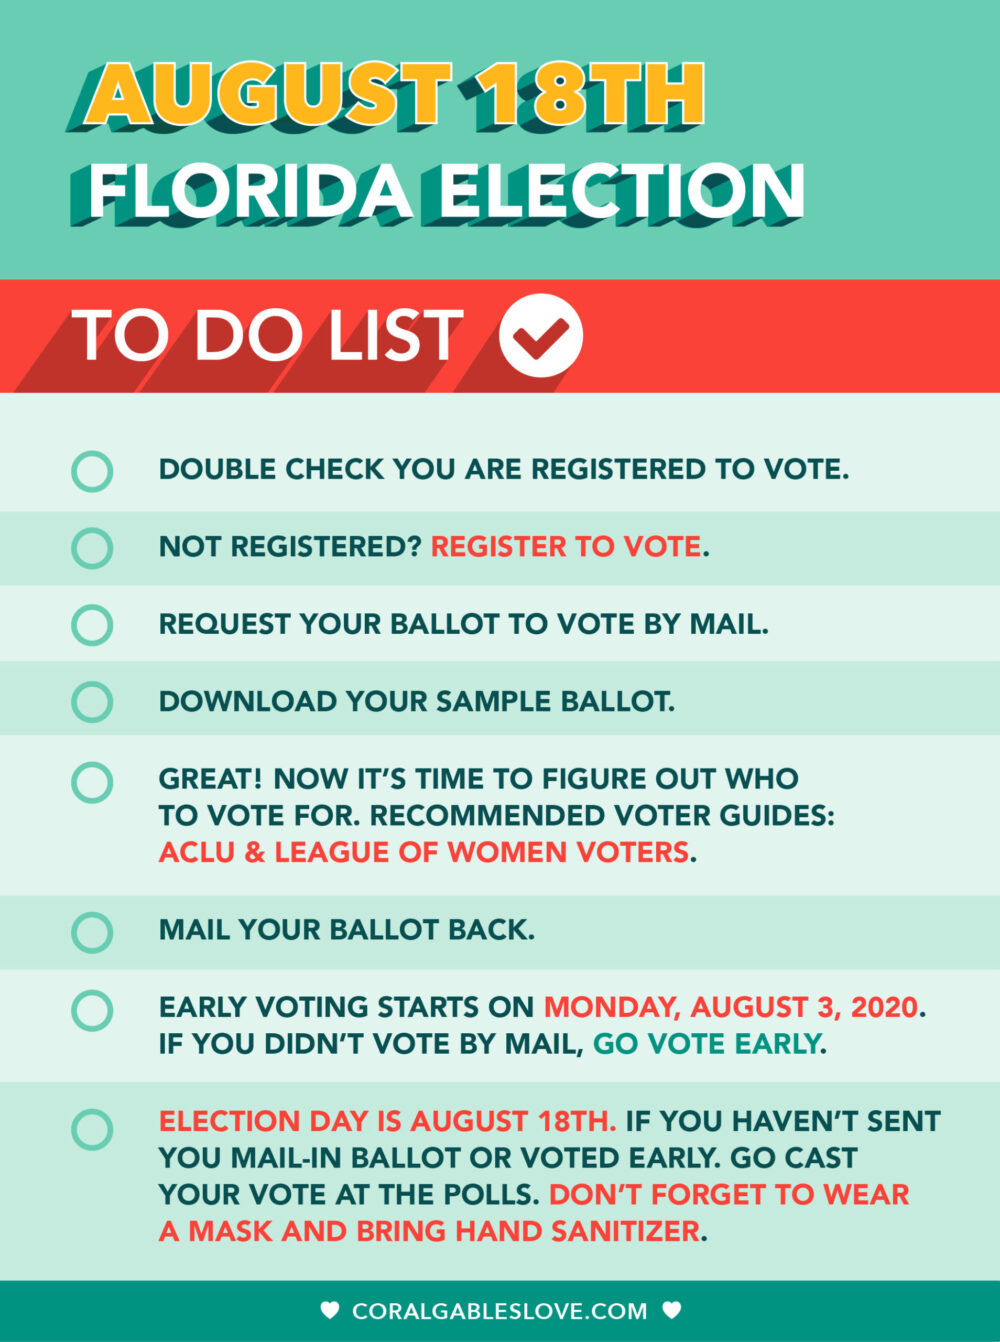 Complete This Checklist To Prepare For the Florida Primary Election on